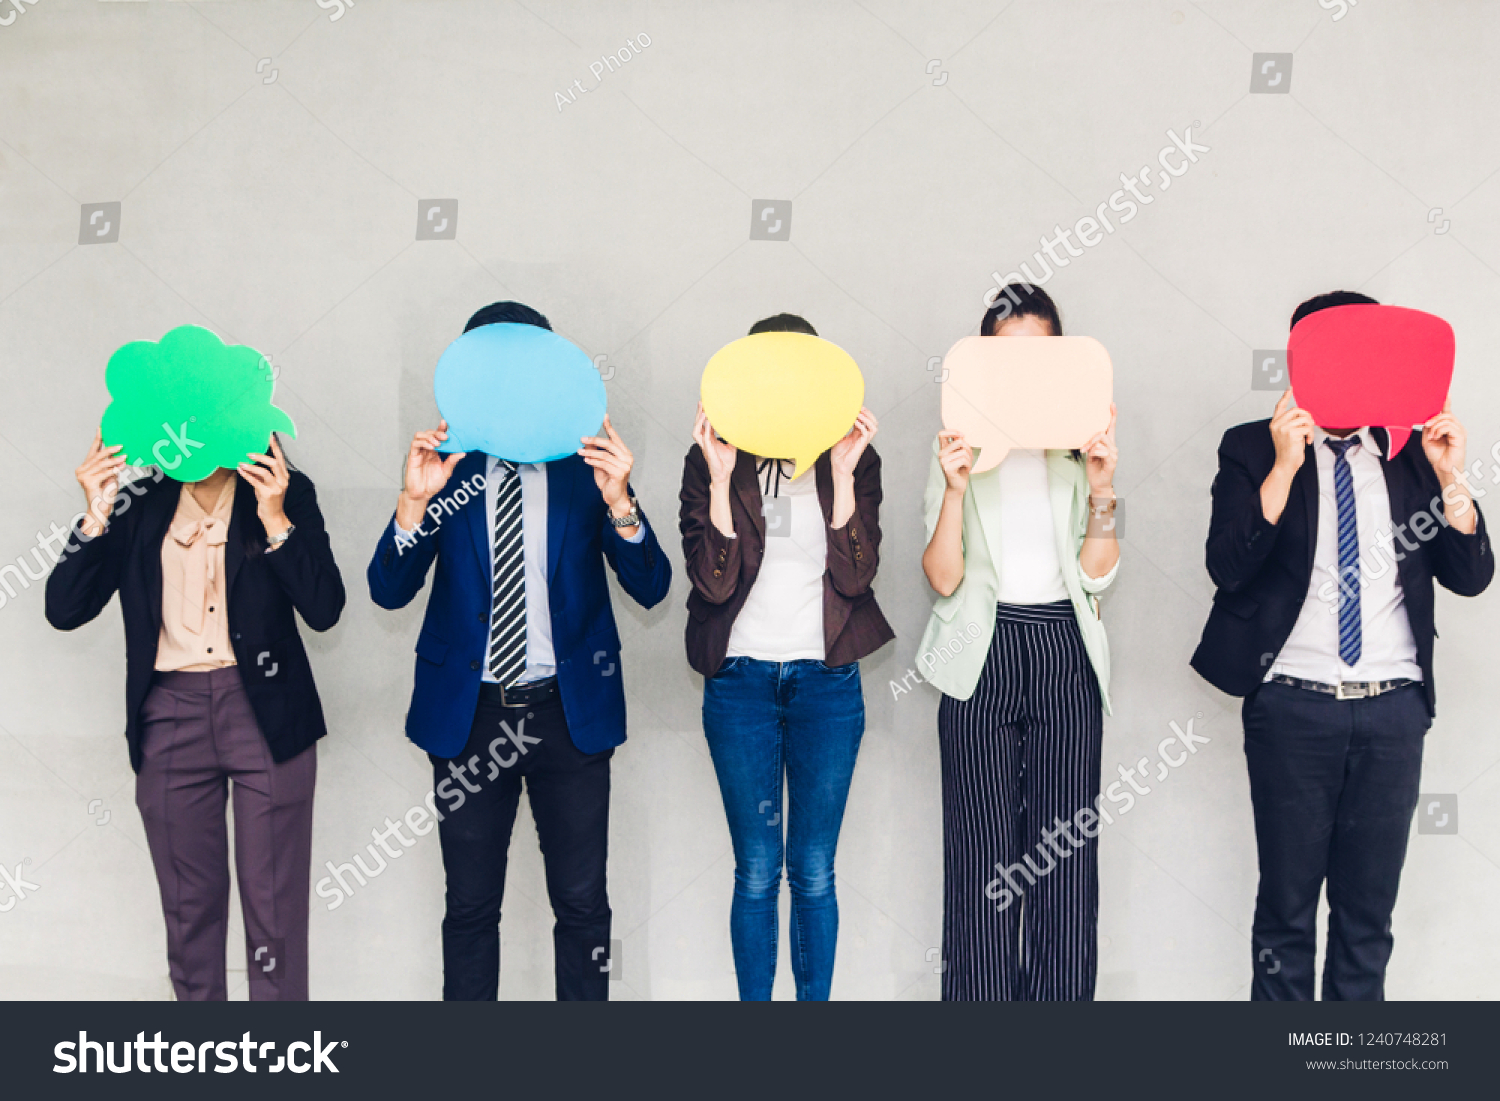 Group of business holding a speech bubble icon #1240748281